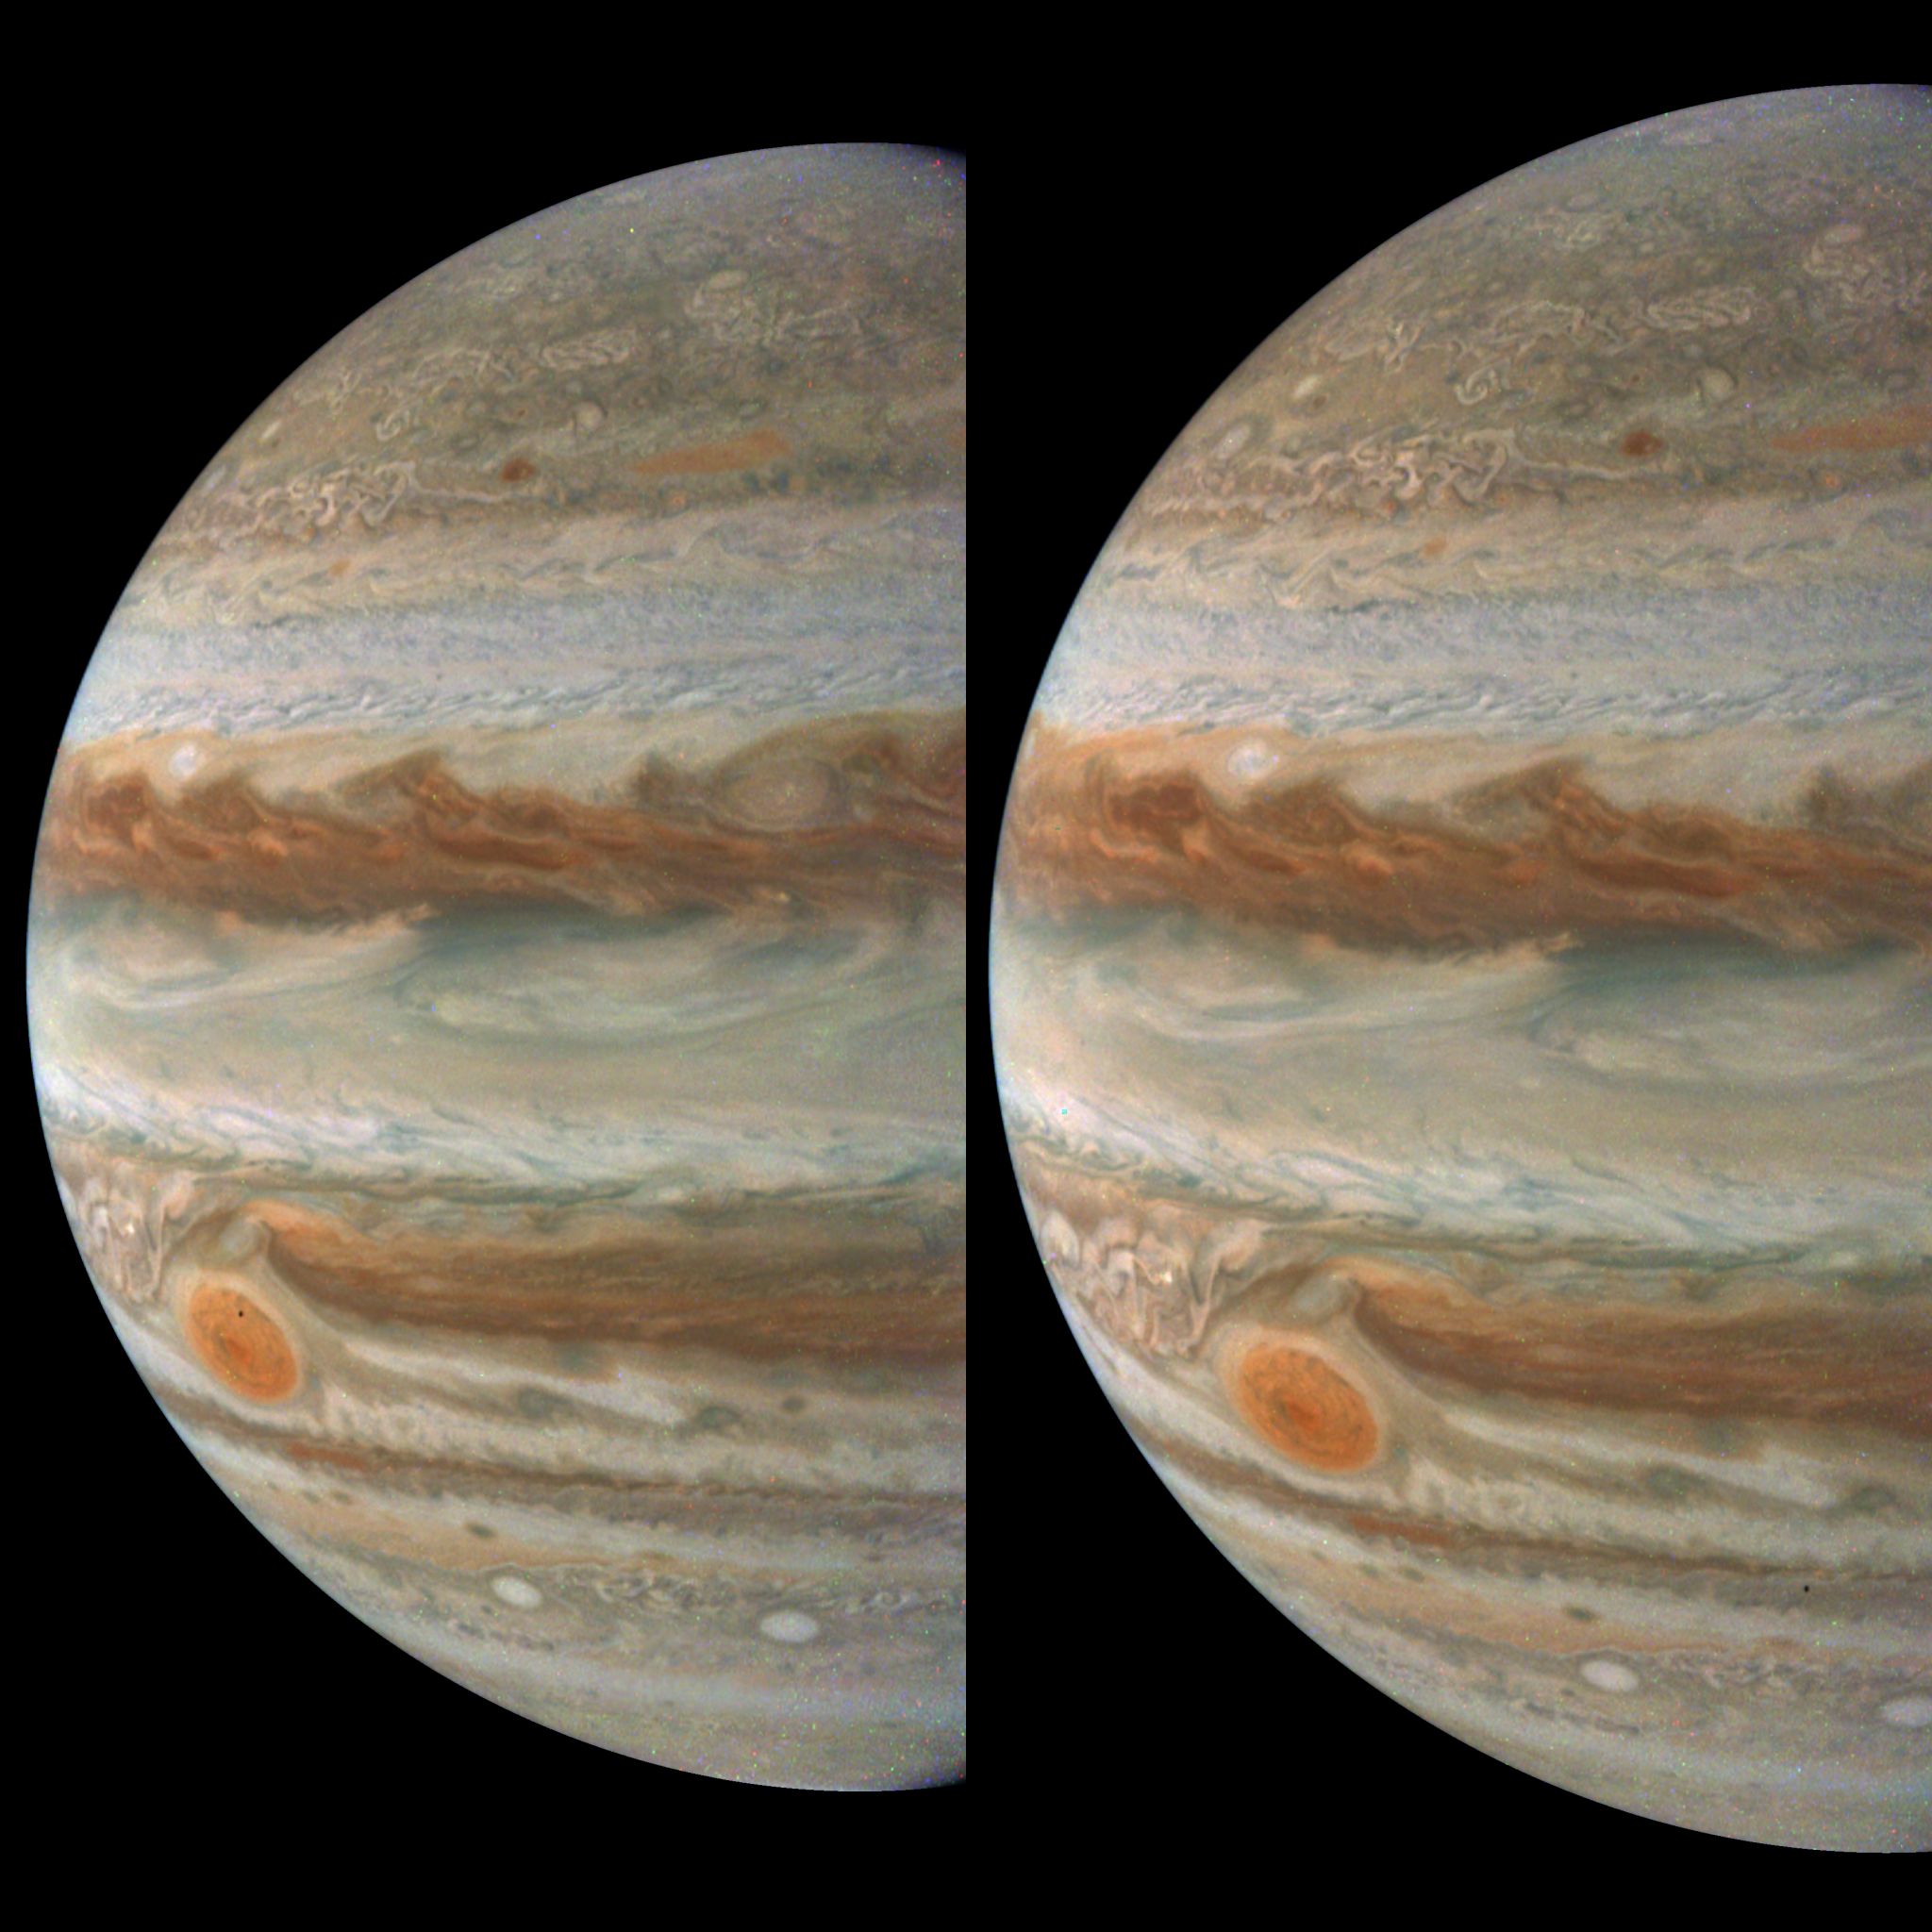 NASA’s Juno mission captured these views of Jupiter during its 59th close flyby of the giant planet on March 7, 2024. They provide a good look at Jupiter’s colorful belts and swirling storms, including the Great Red Spot.